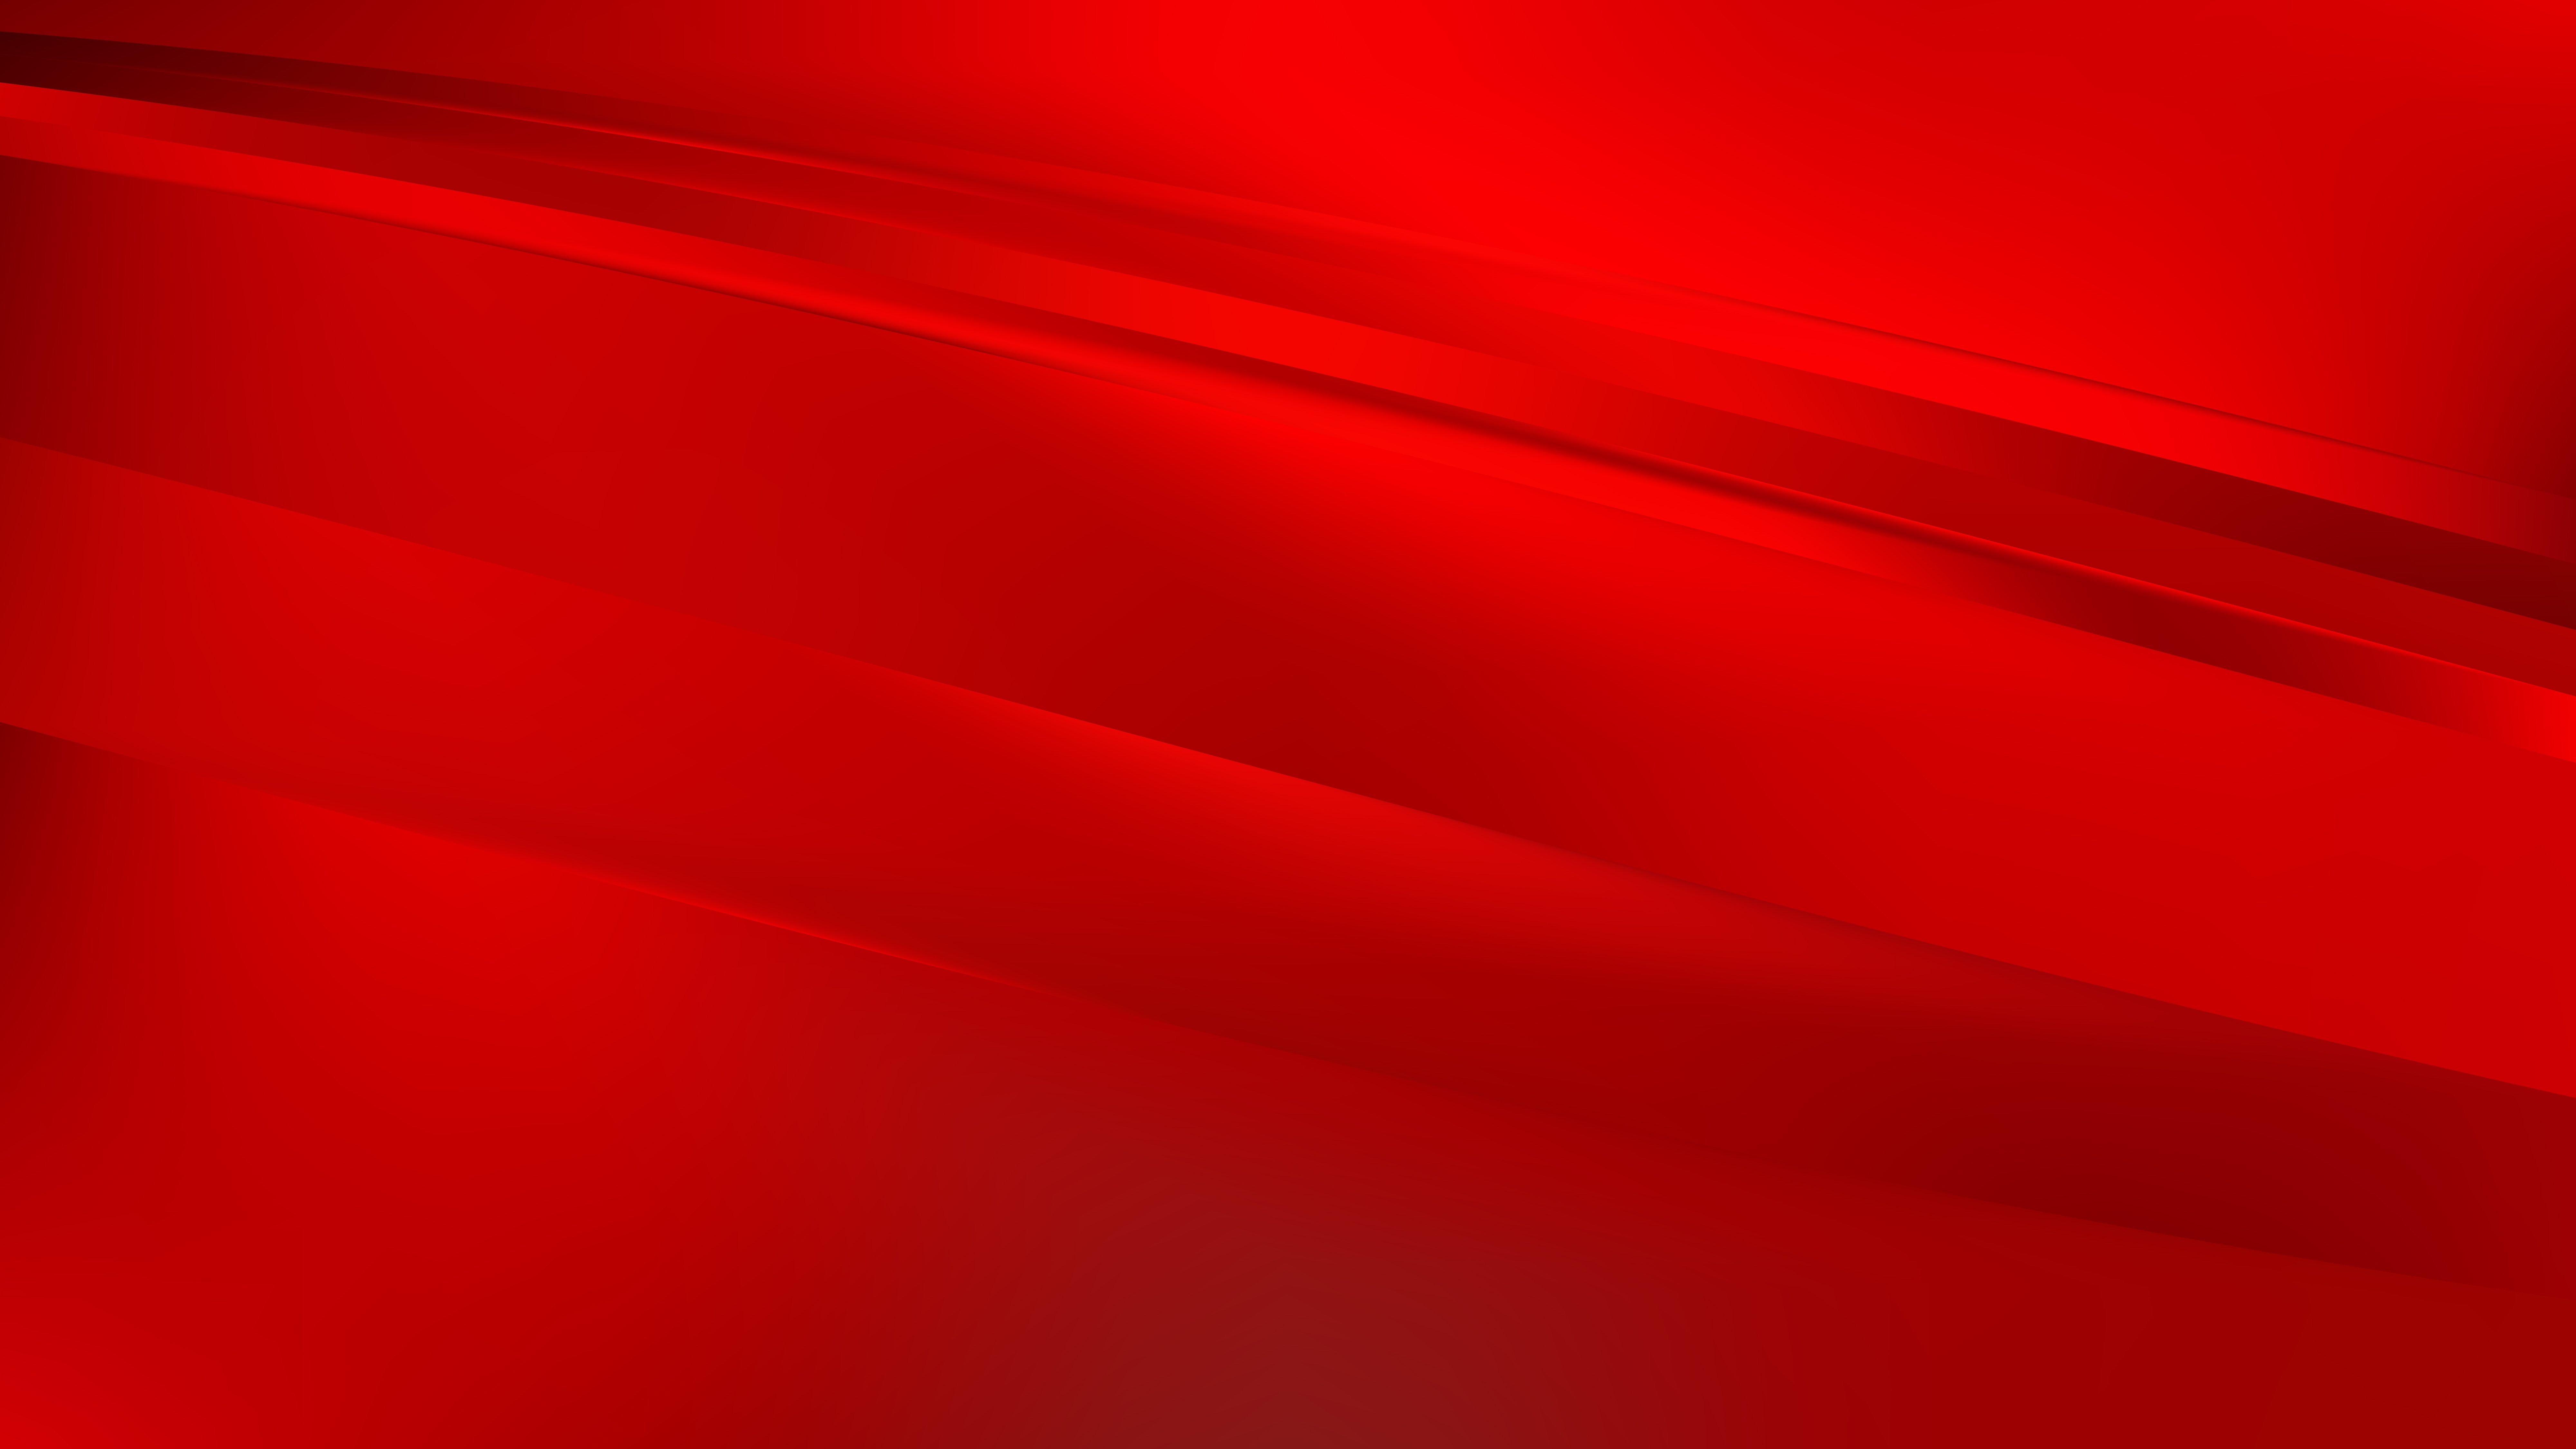 Free Abstract Red Background Vector Illustration